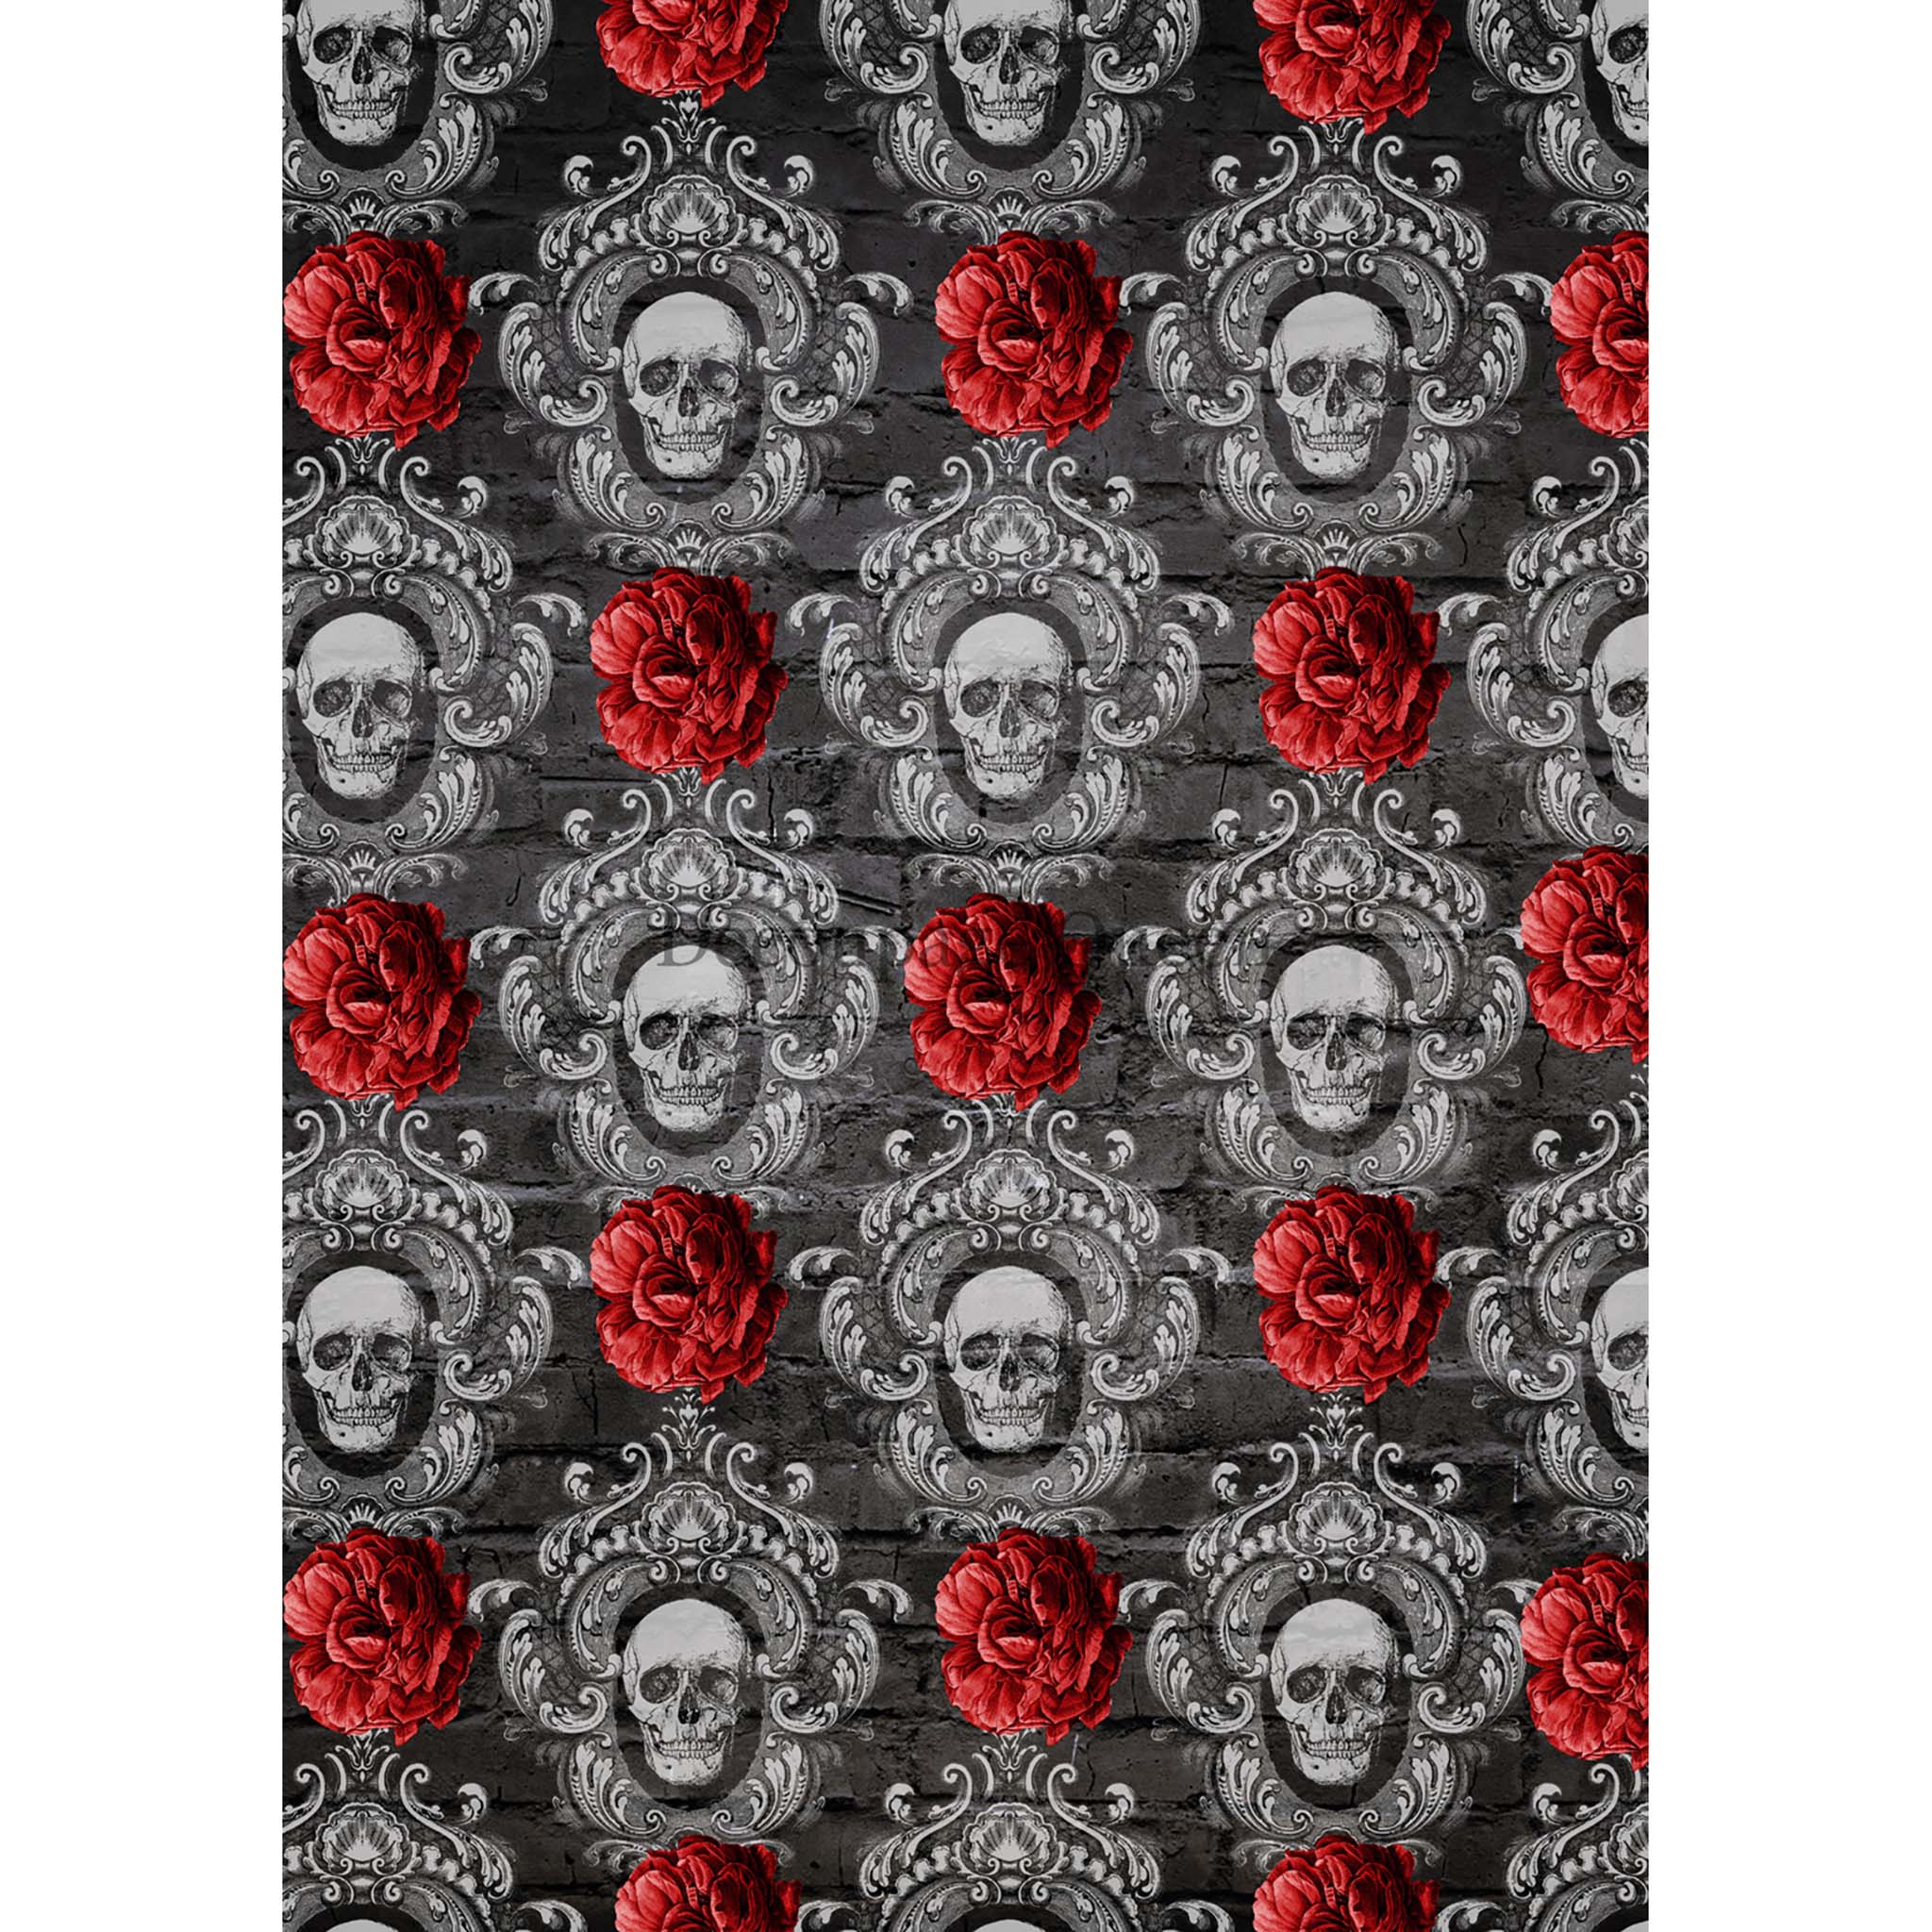 A1 rice paper design featuring repetitive skulls inside ornate brocade frames and bunched red poppies all against a dark grey brick wall background. White borders are on the sides.